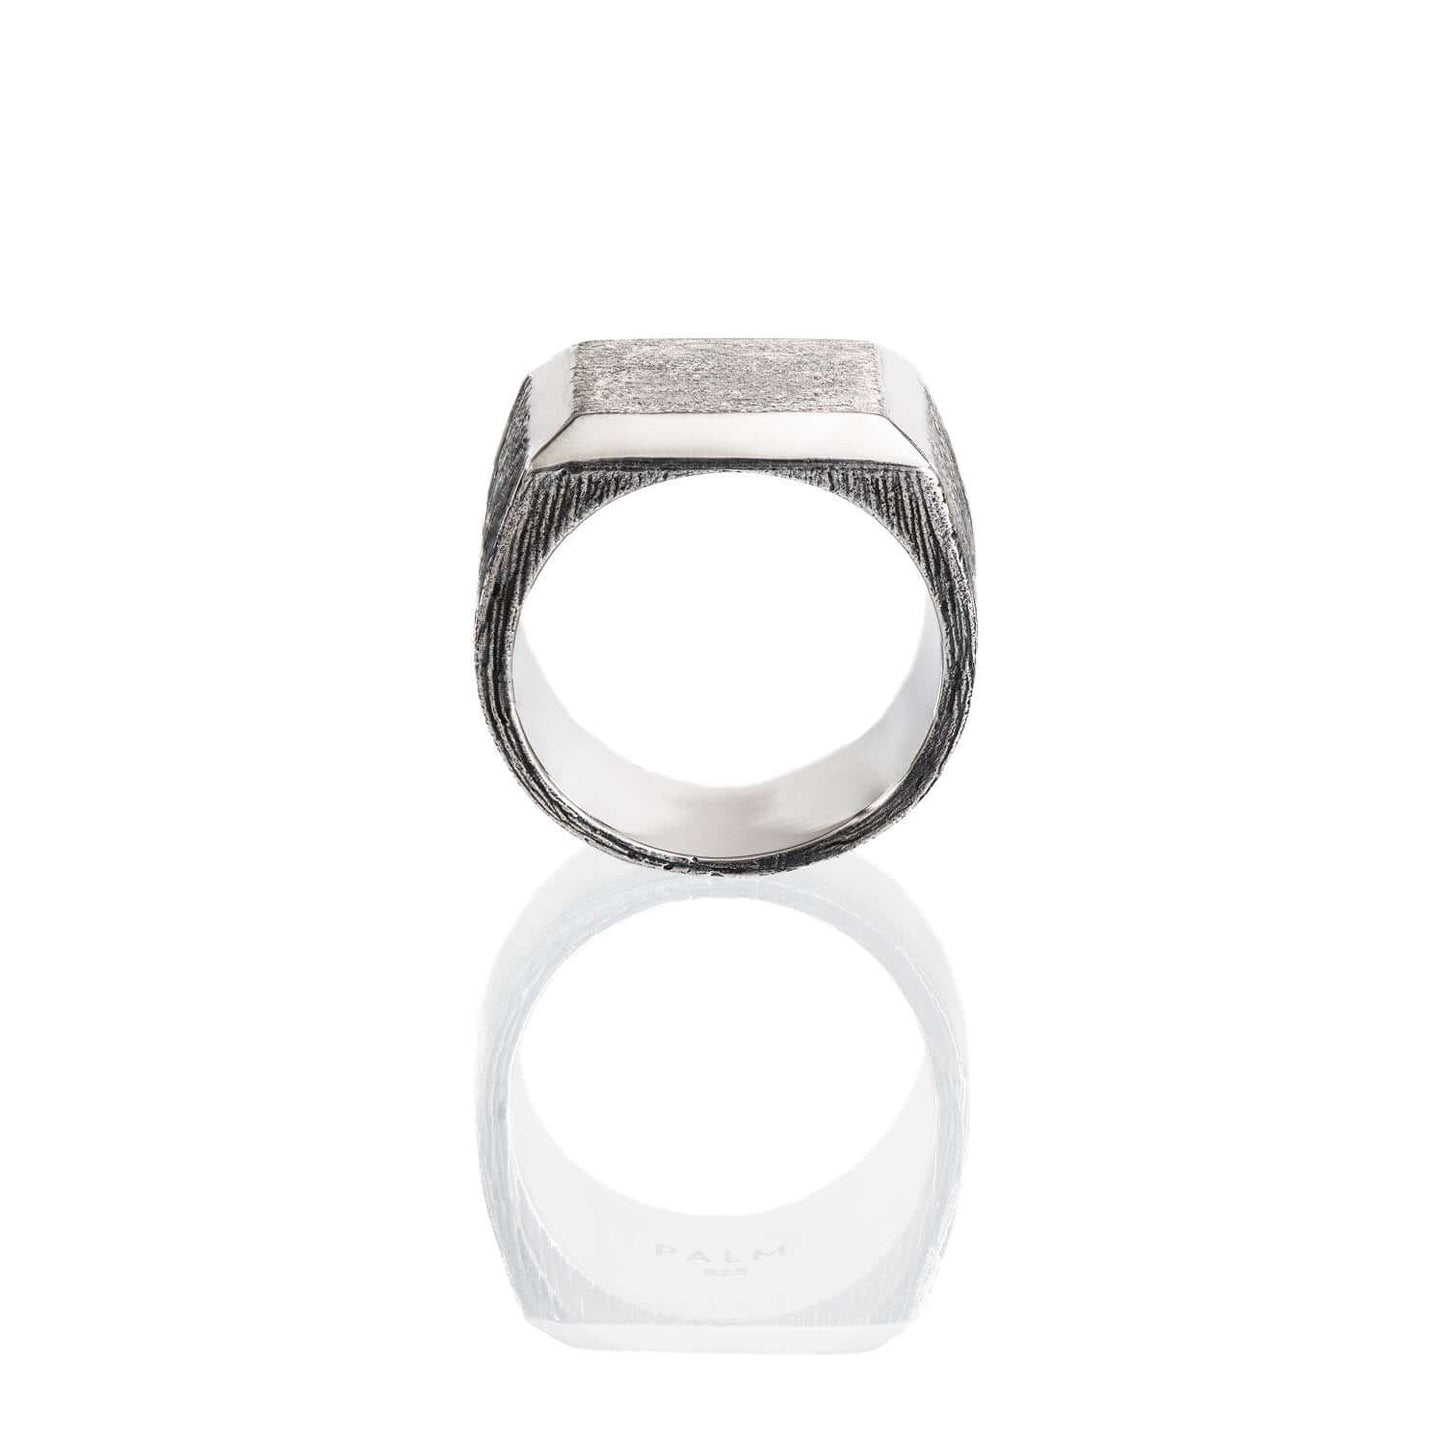 SIGNET RING. - 925 Silver Signet Ring 20mm - PALM. | Handcrafted Jewelry-